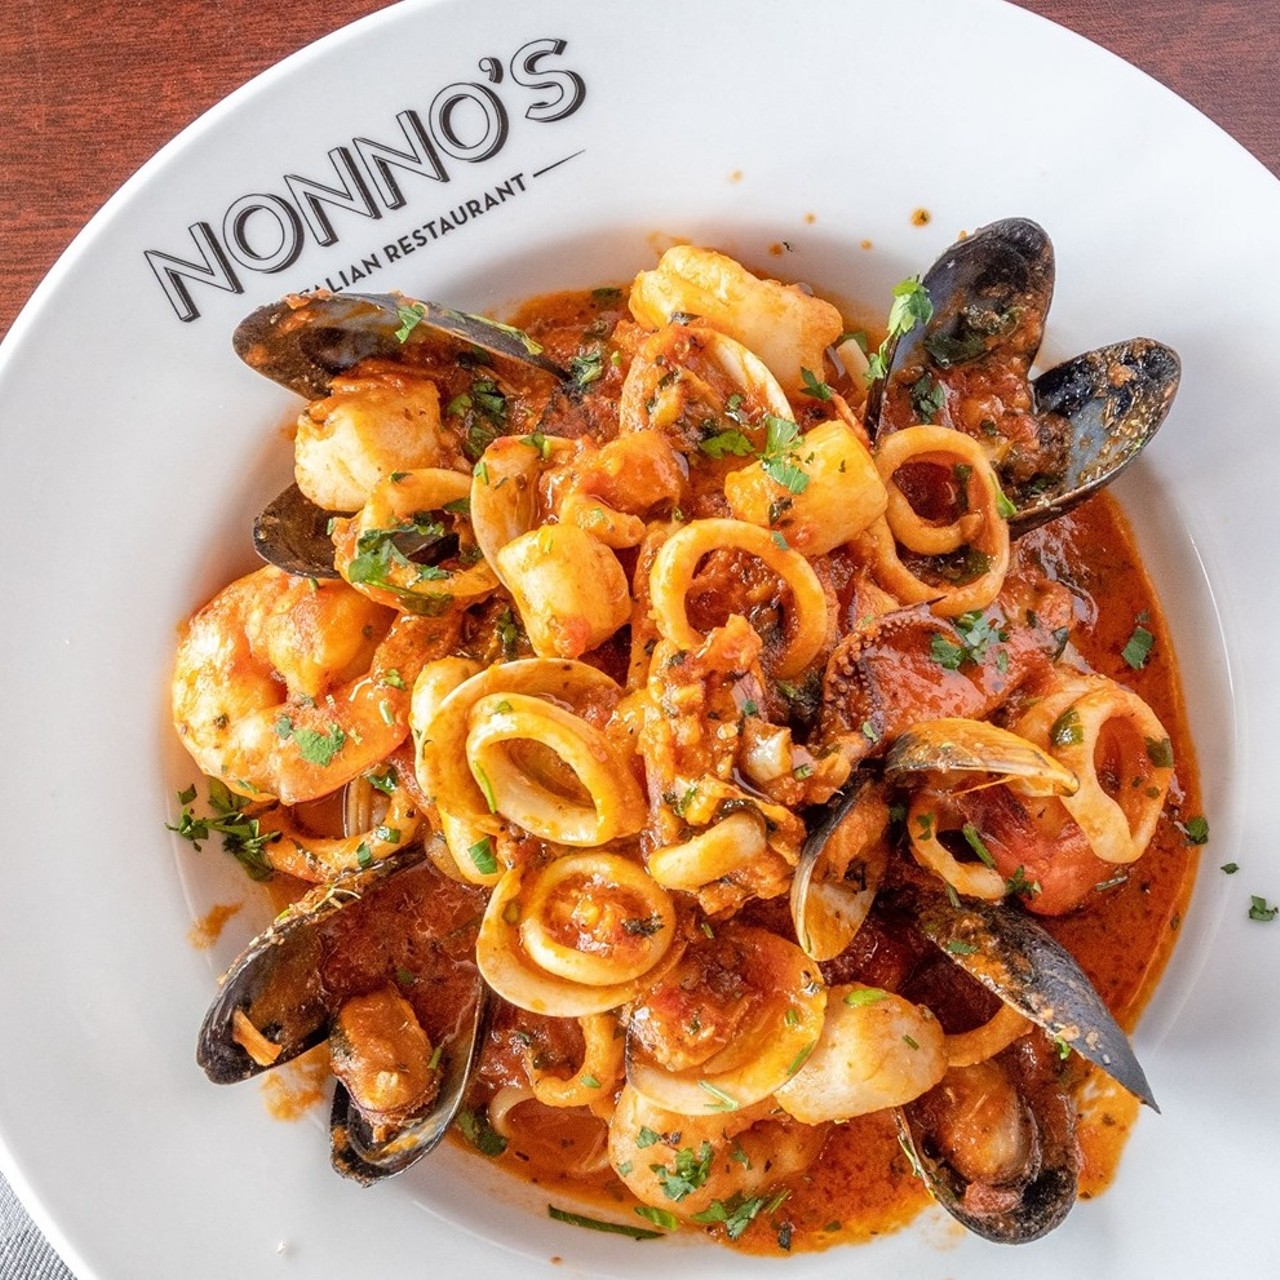 Nonno&#146;s Italian Restaurant 
407-260-8900, 1140 E. Altamonte Drive #1018, Altamonte Springs
Rooted in Sicilian tradition and a tomato sauce beyond compare, Nonno&#146;s Italian restaurant delivers hand-crafted pasta, flatbreads and salads. Its Italian wedding soup, bruschetta and chicken marsala are some of their most popular items. 
Photo via Nonno&#146;s Italian Restaurant/Facebook